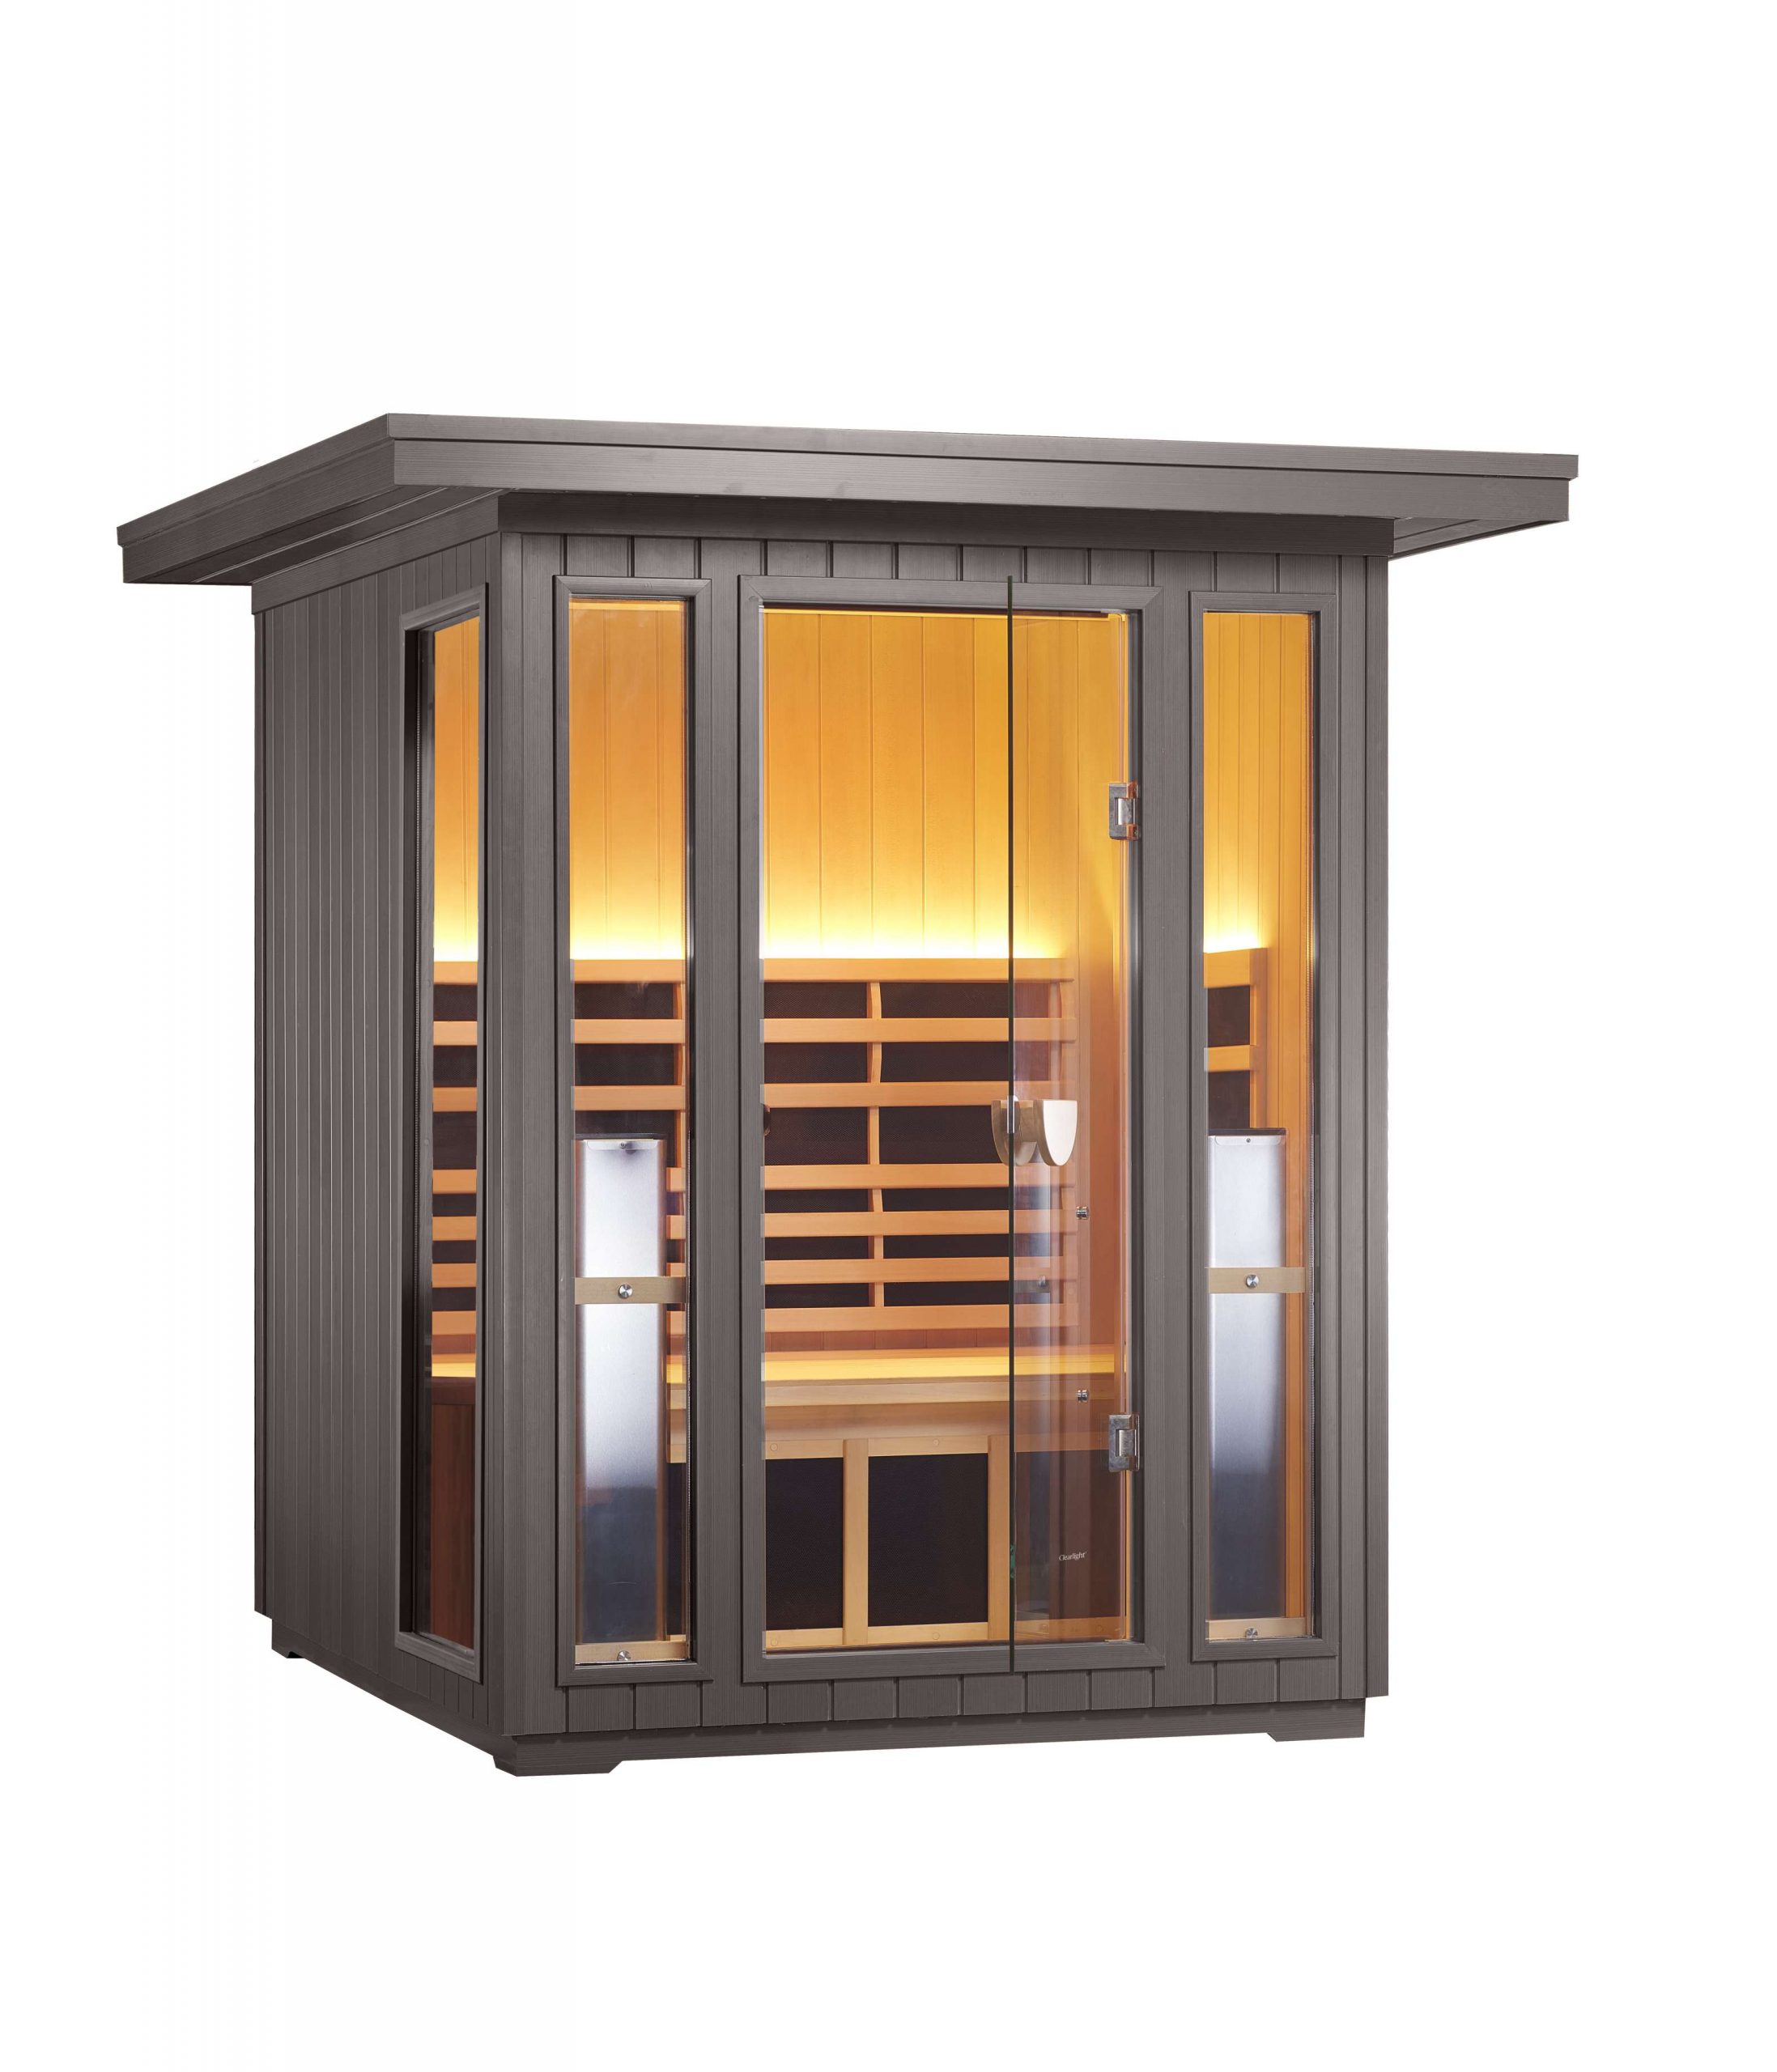 Clearlight Sanctuary Outdoor 2 Full Spectrum Infrared Sauna Front